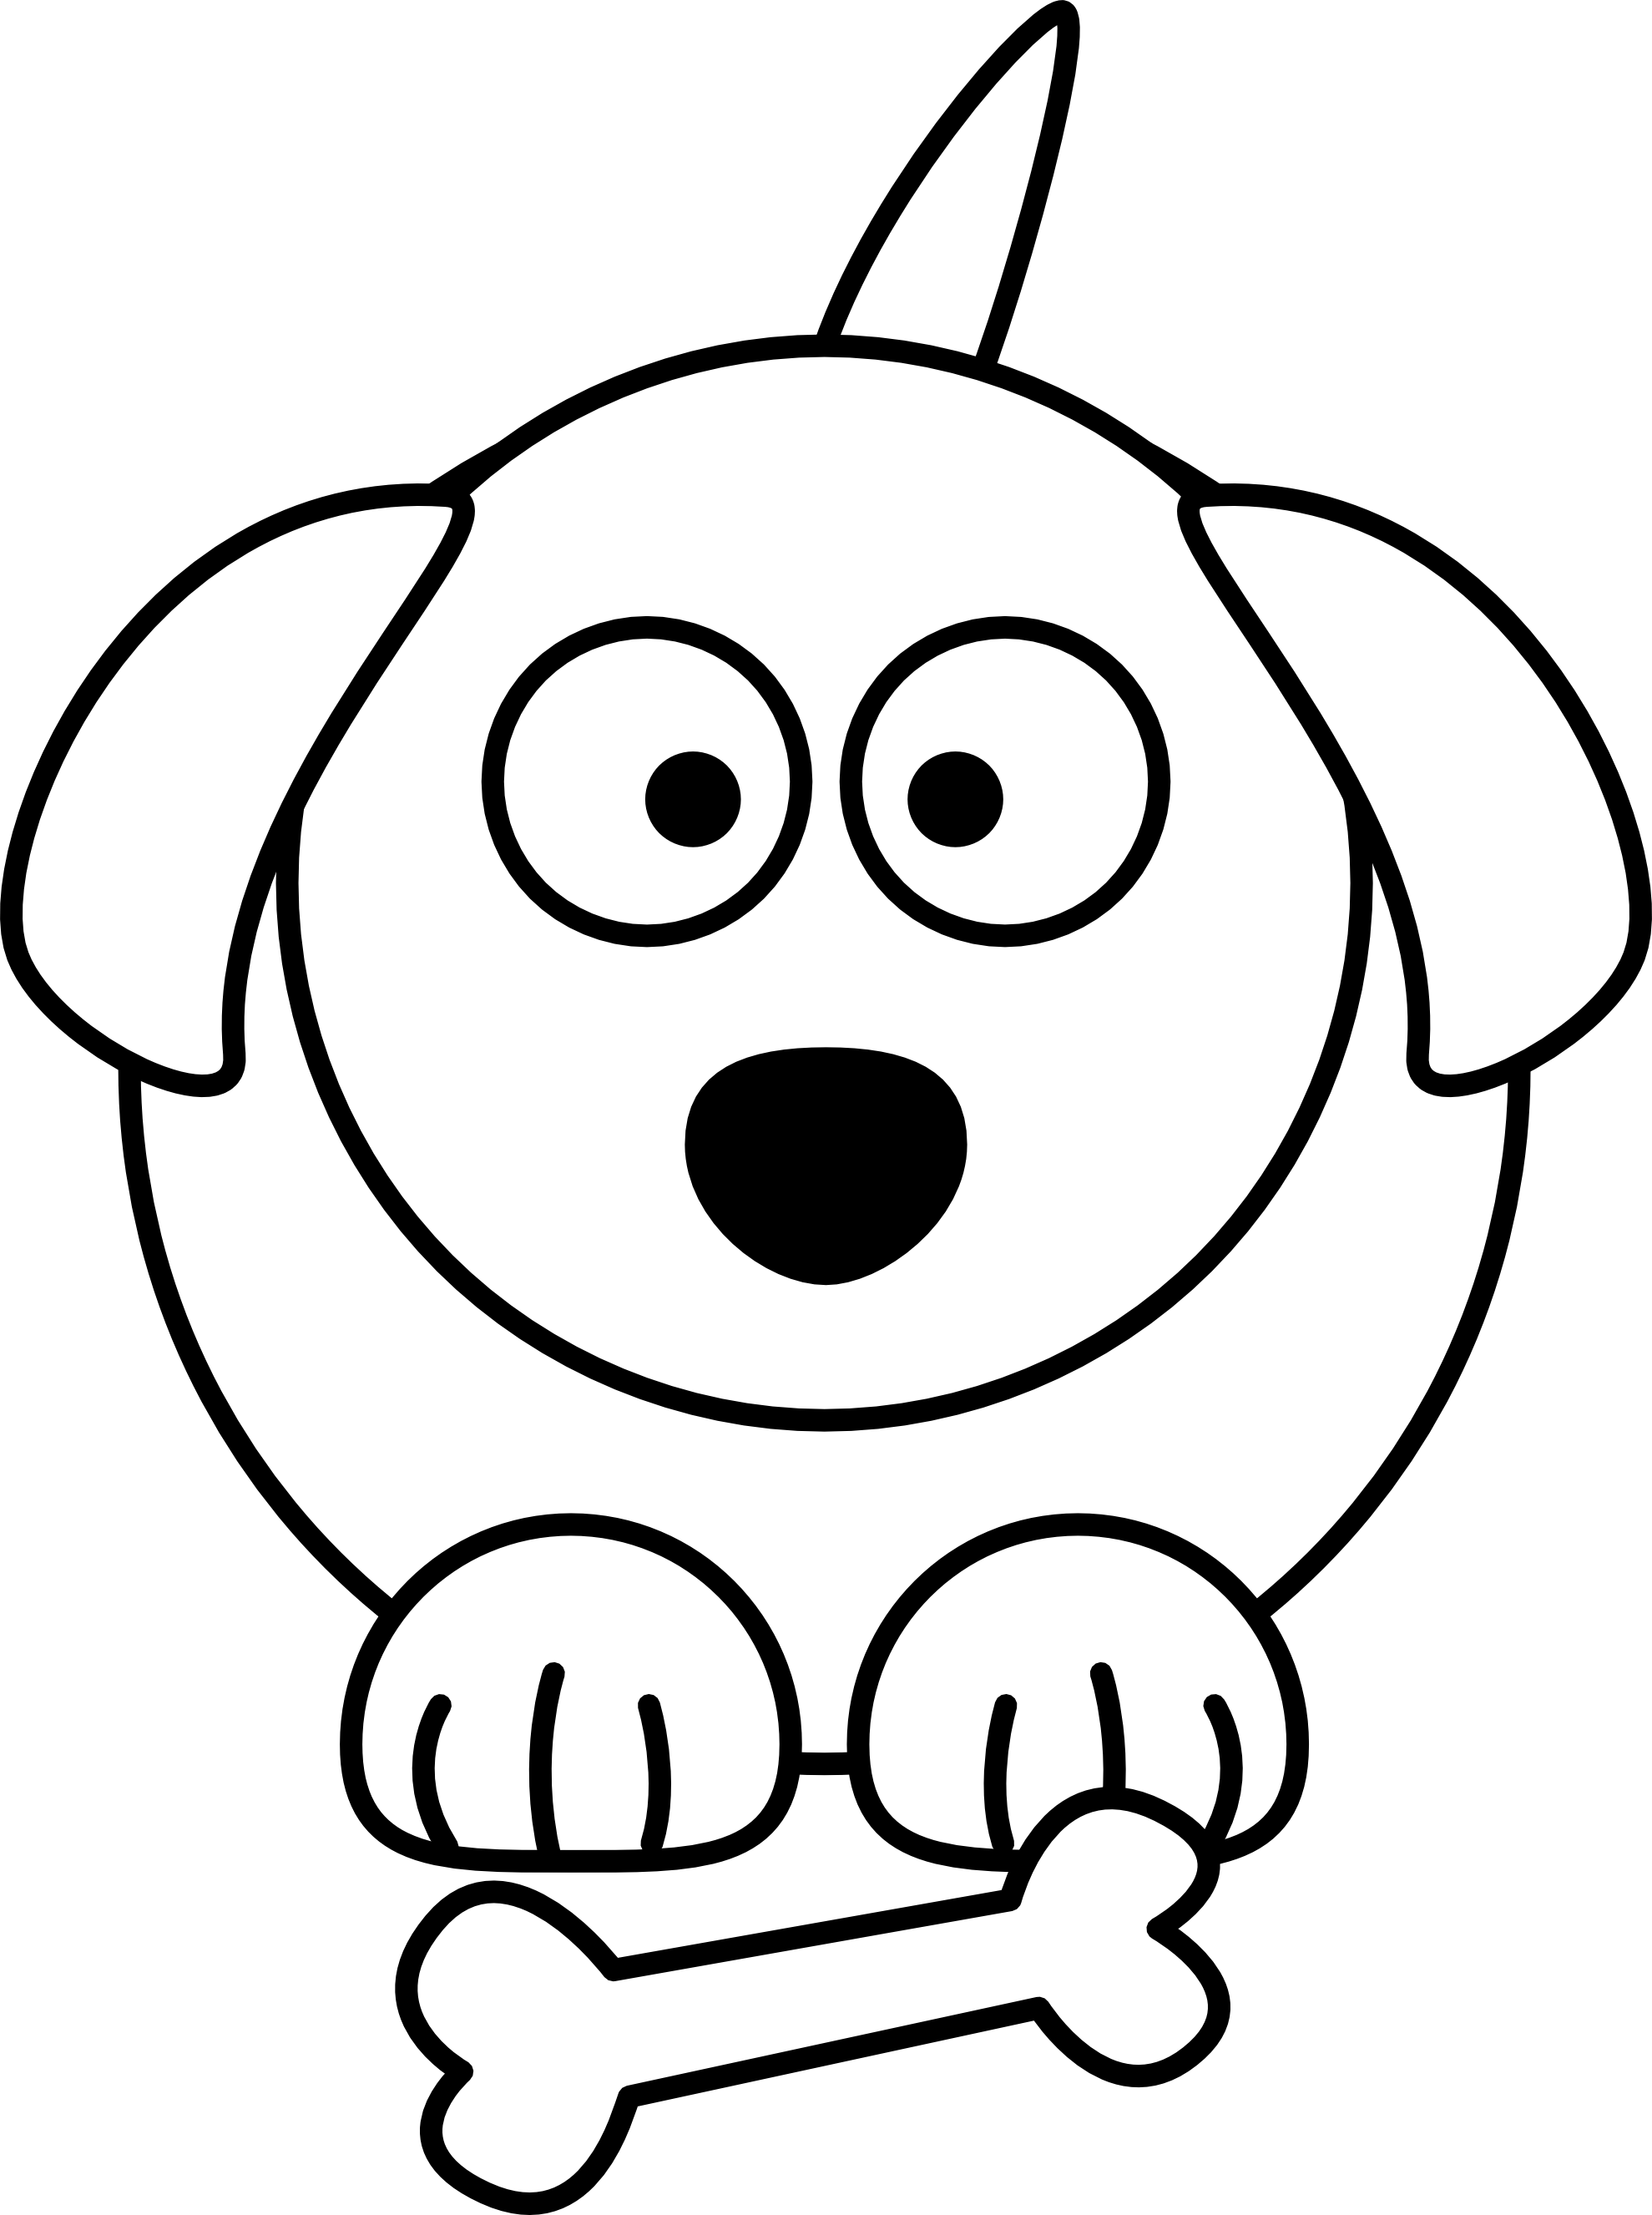 Free Dog Clipart Black And White, Download Free Dog Clipart Black And